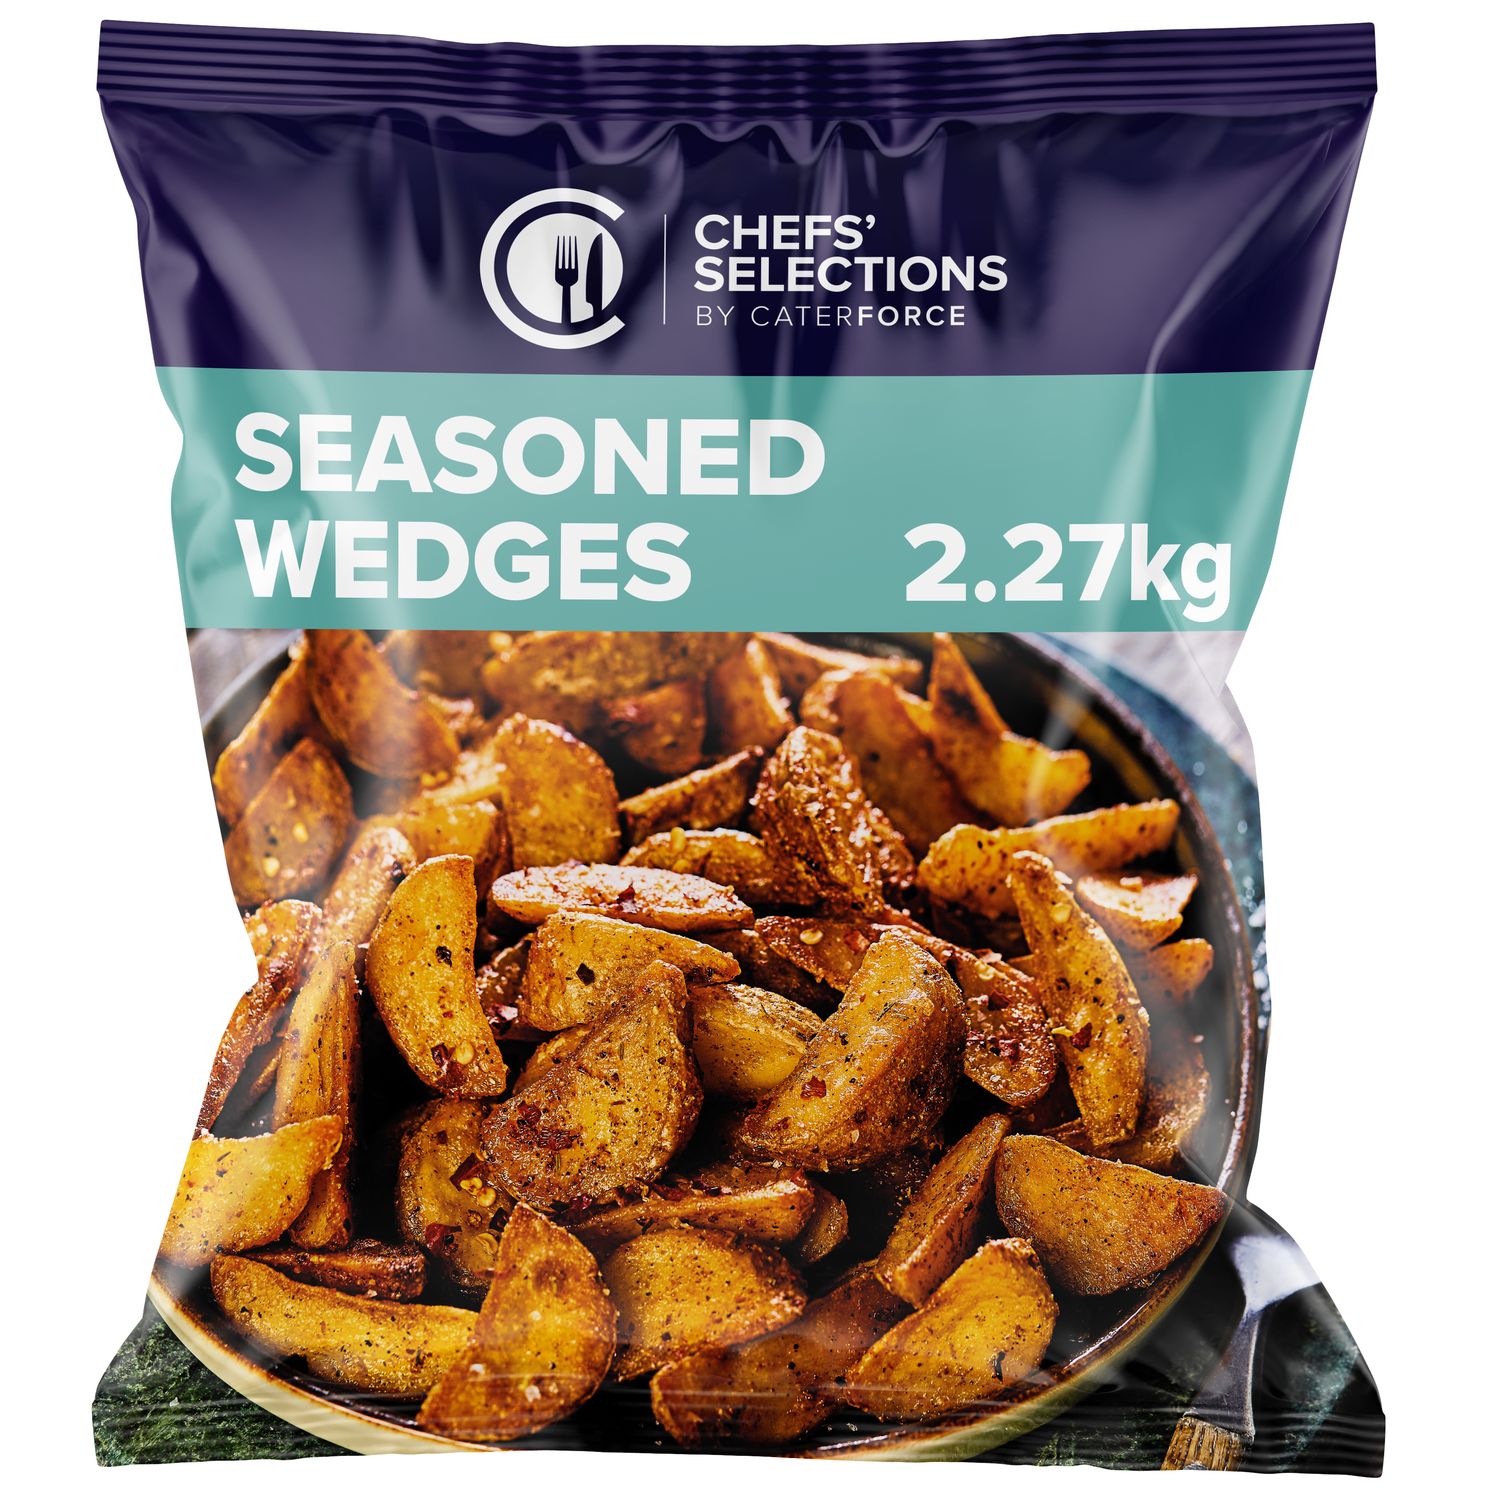 Chefs’ Selections Seasoned Wedges (4 x 2.27kg)